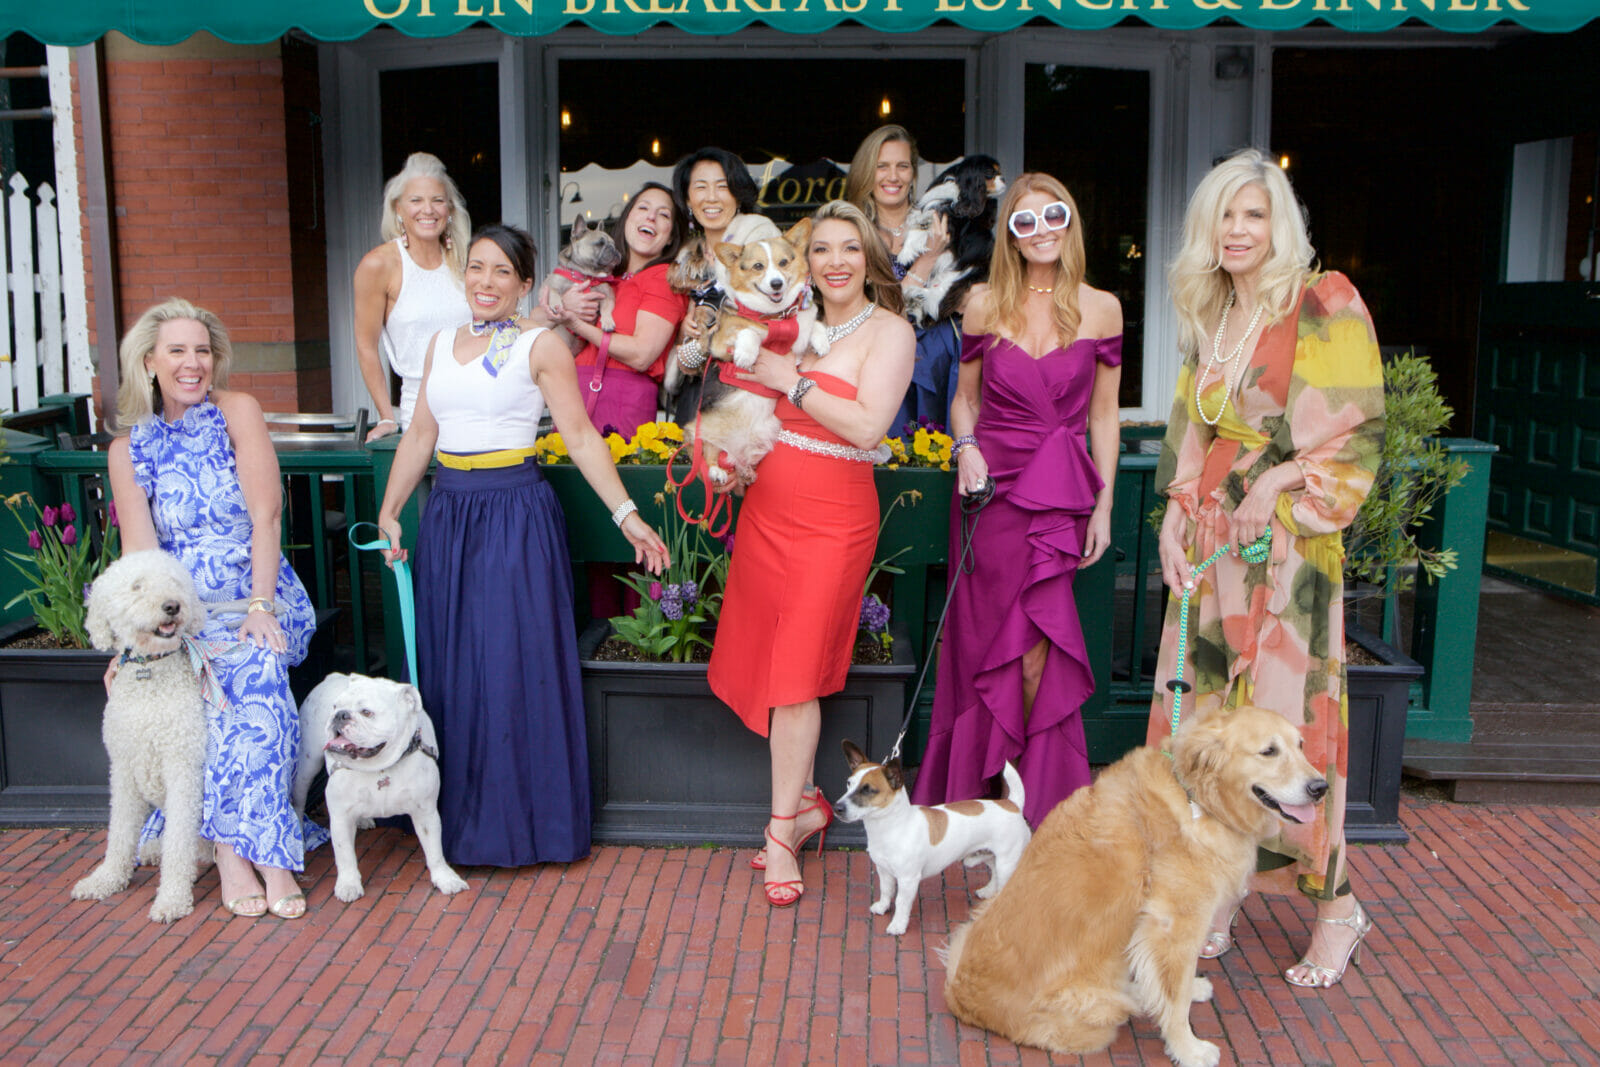 Bellevue bow WOW! Newport Living and Lifestyles * Sponsored by Lucky Dog Resort # Photo by AdamHimberPhoto.com